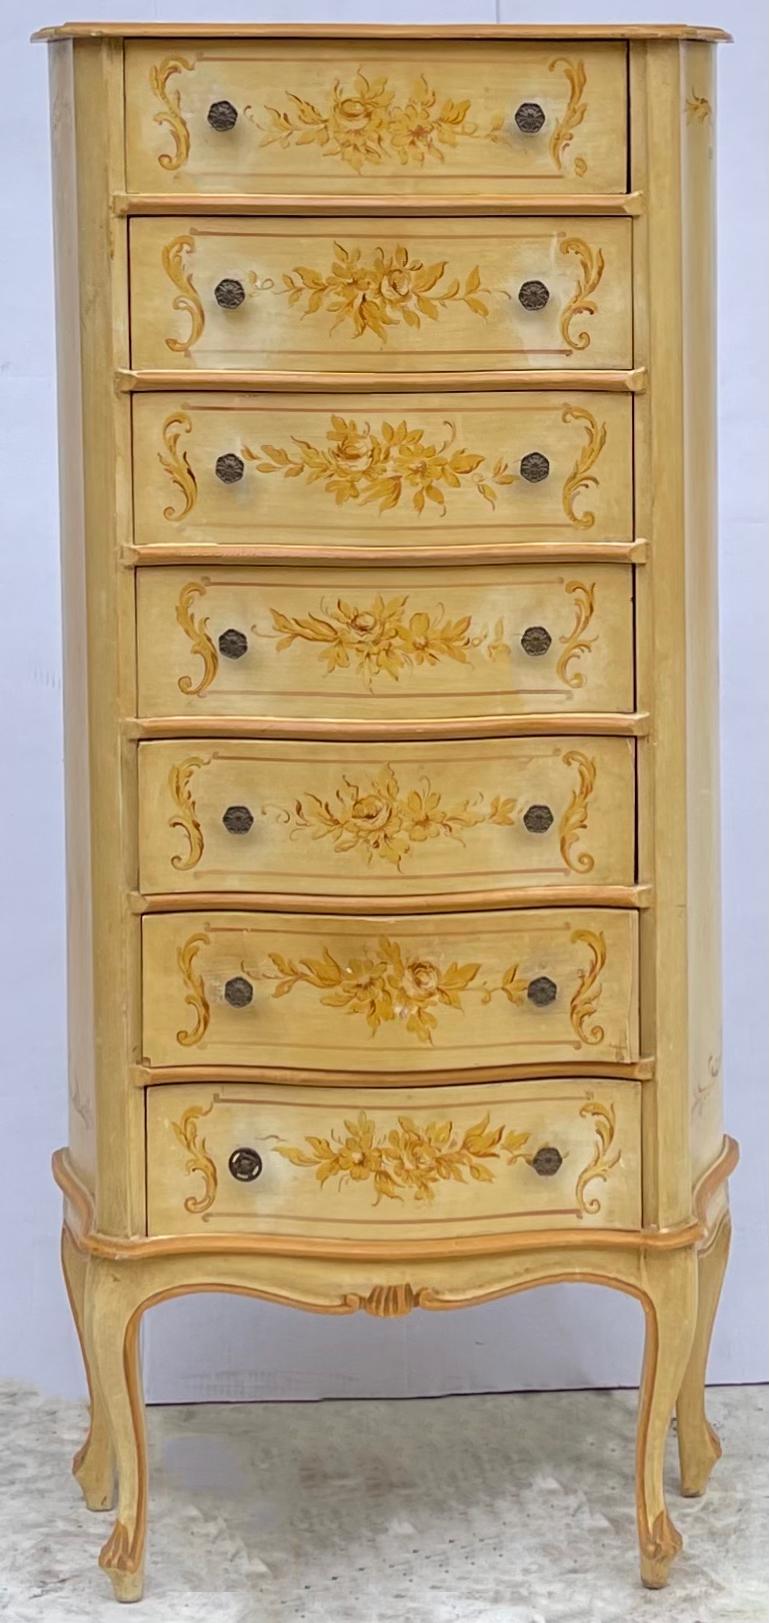 This is a mid-century hand painted Venetian chest. It was typically for lingerie but would be wonderful for jewelry or a bath or many other fun purposes. The paint does show some patina, but it is structurally sound.